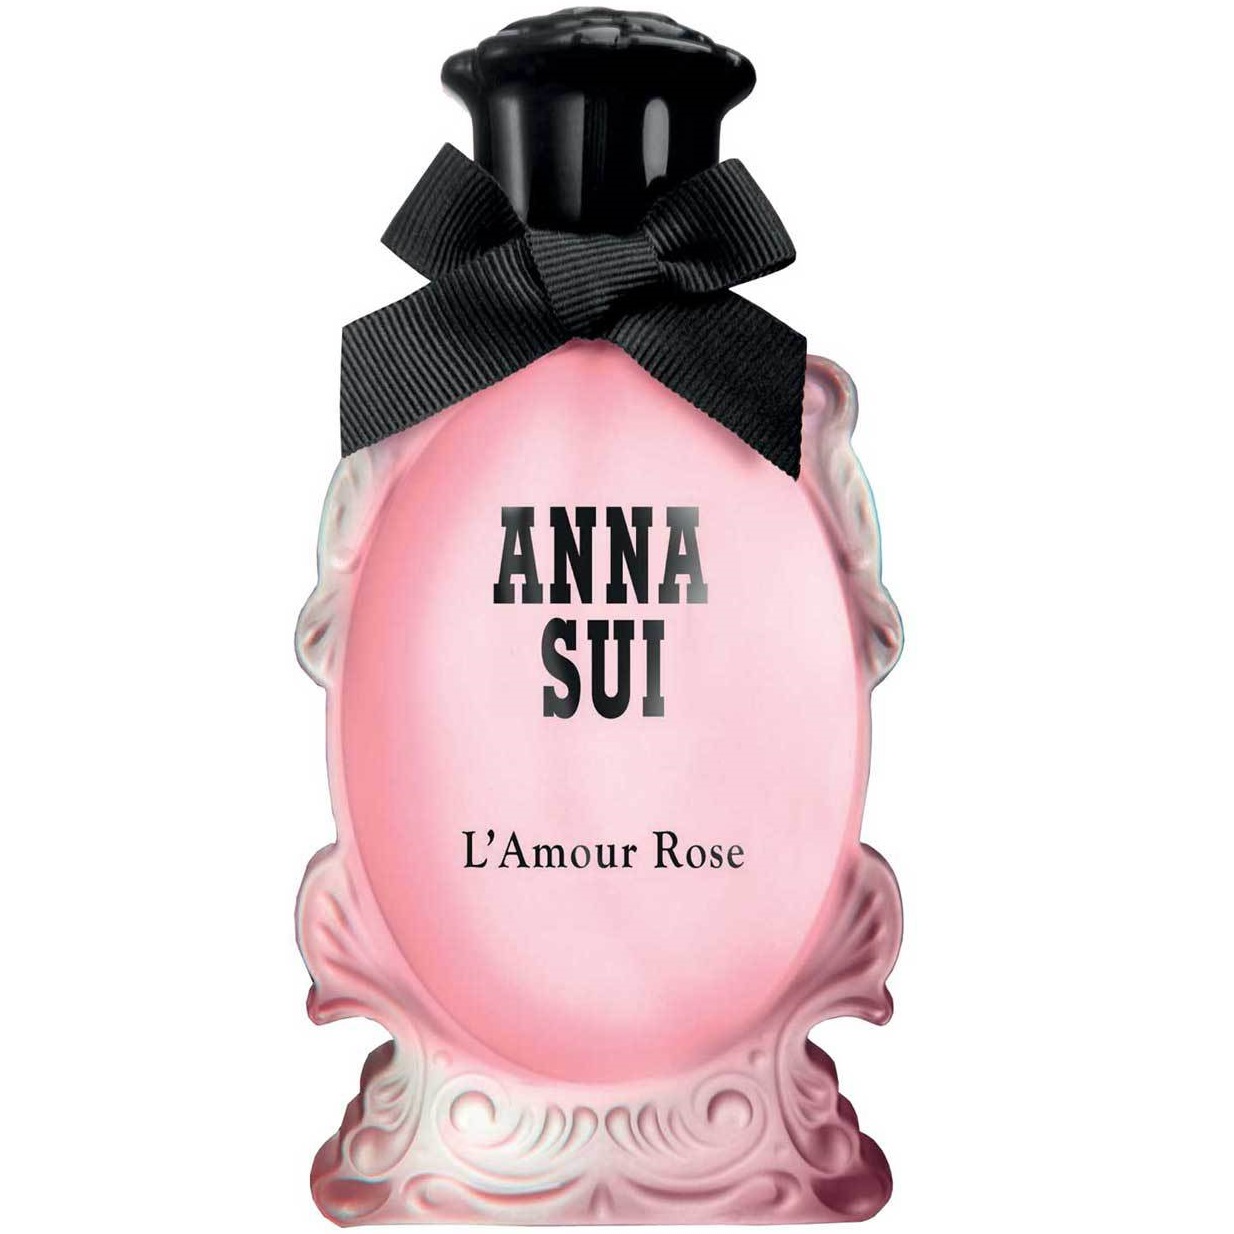 Anna Sui - L'Amour Rose (2мл)